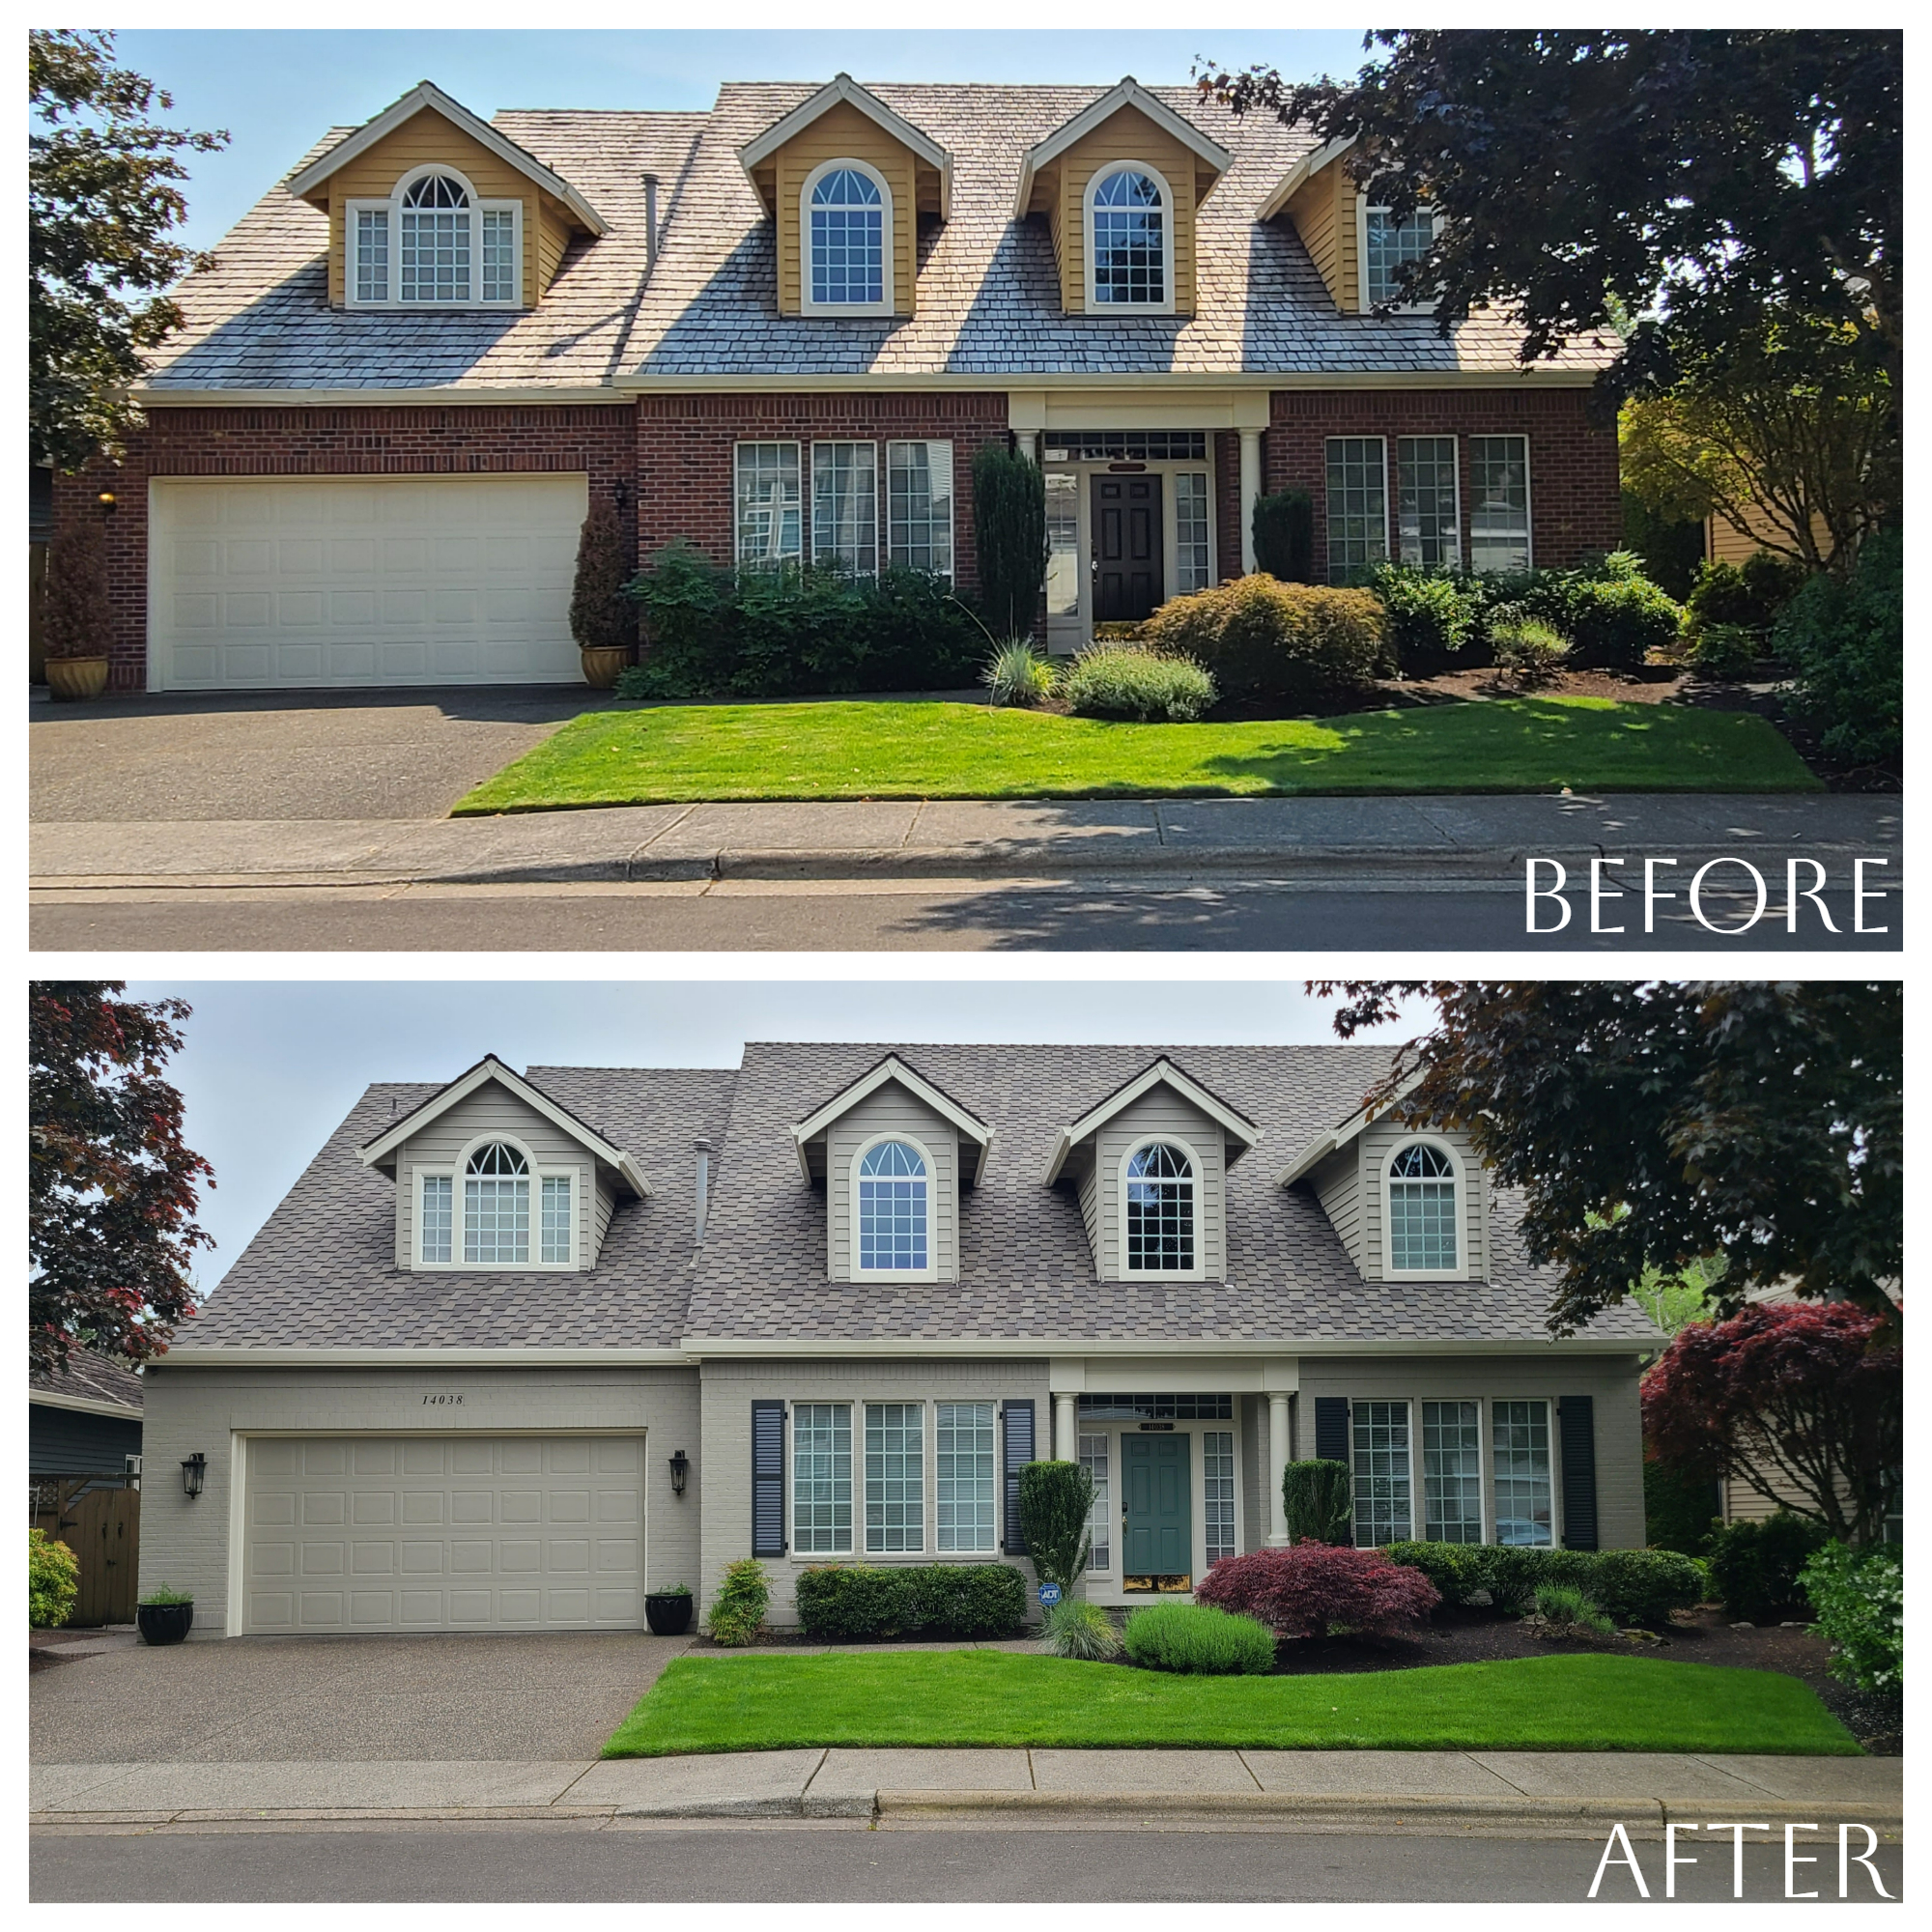 Secure before and after pictures of an exterior house spot during the painting process.